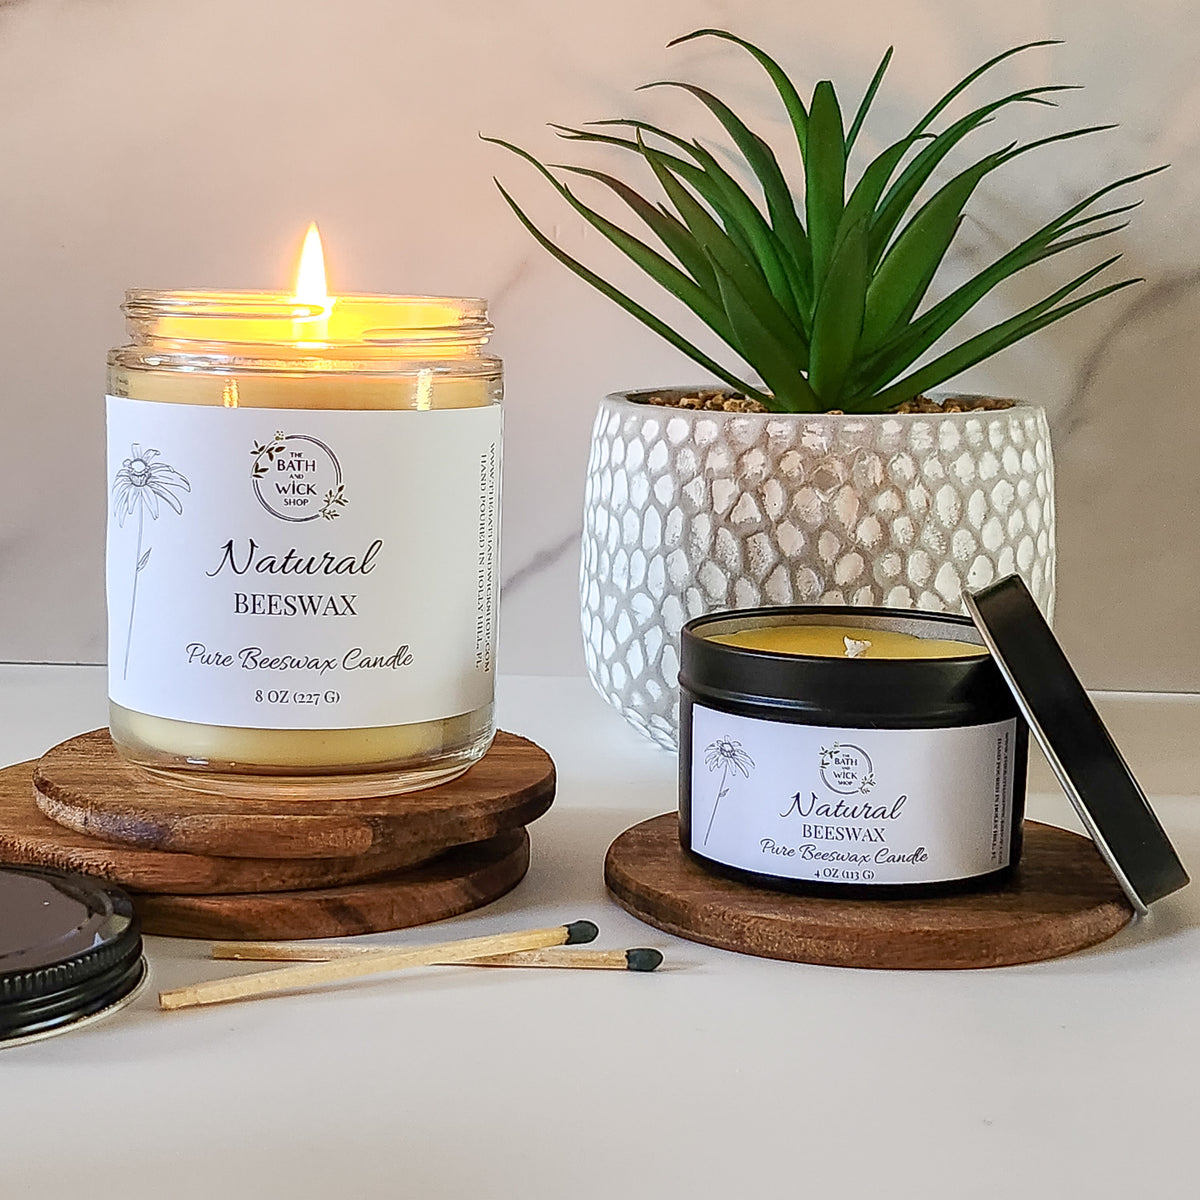 Purely Beeswax 100% Pure Beeswax Candle Unscented Natural Honey Scent Only  Beeswax & Cotton Wick Handmade by Aire Candle Co. 